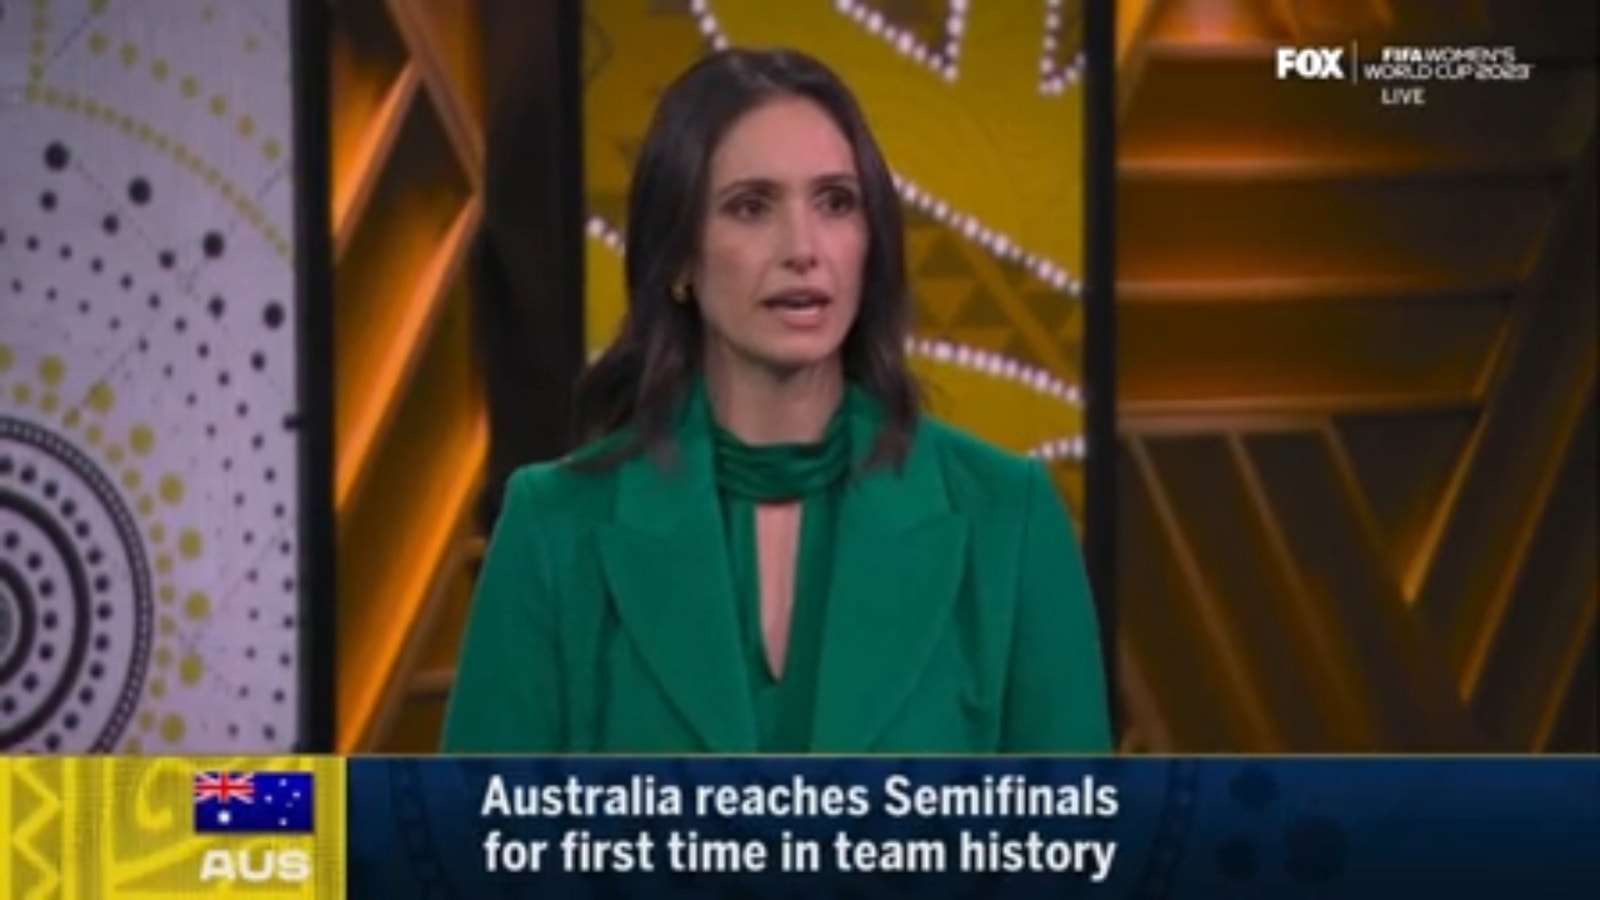 Kate Gill on Australia advancing: 'I'm so proud of what they're doing for women's football'